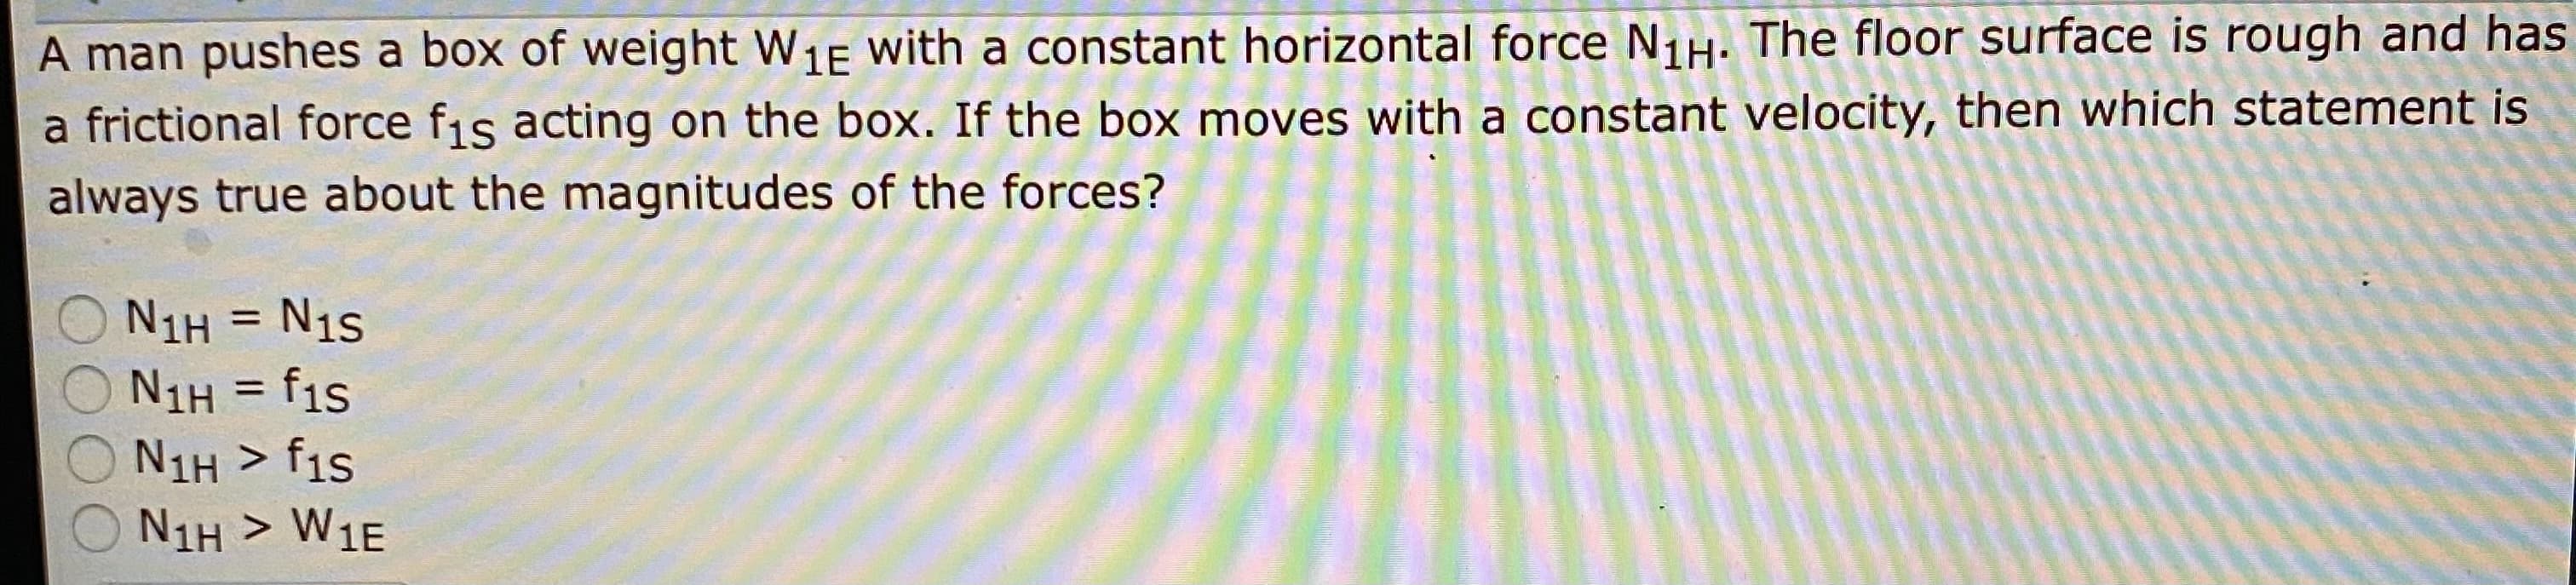 A man pushes a box of weight W1E with a constant horizontal force N1H: The floor surface is rough and has
a frictional force fis acting on the box. If the box moves with a constant velocity, then which statement is
always true about the magnitudes of the forces?
N1H = N1S
%3D
N1H = f1s
N1H > fis
N1H > W1E
%3D
